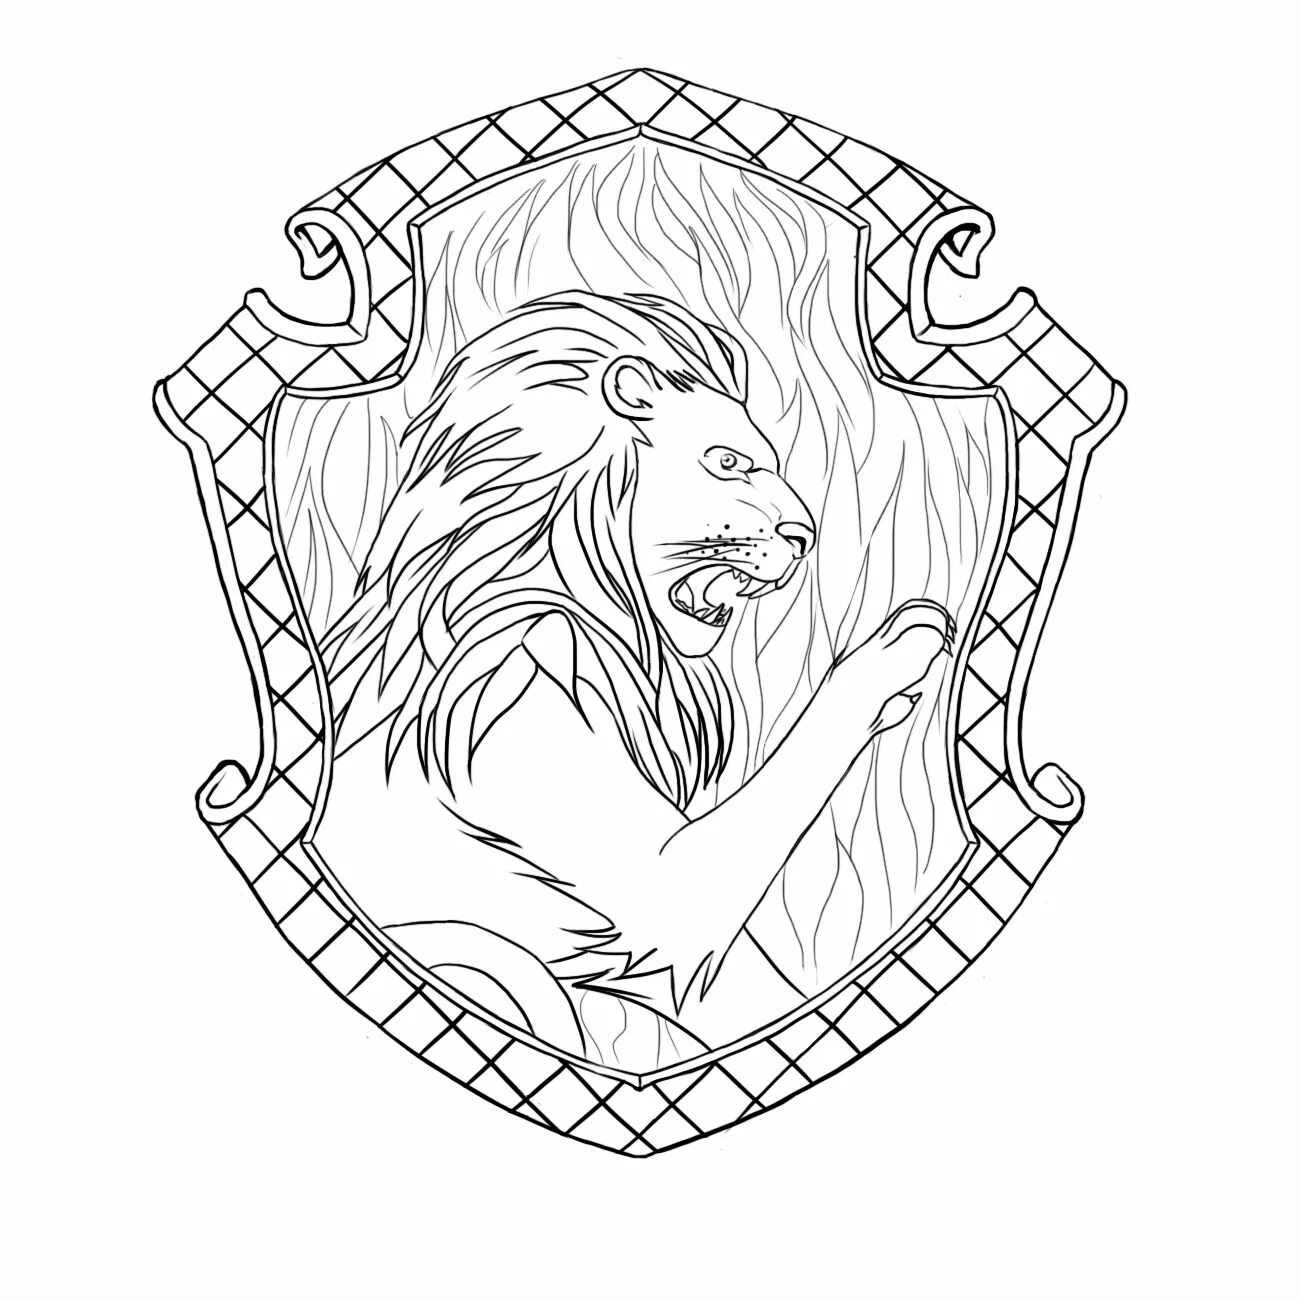 Adorable slytherin coloring page